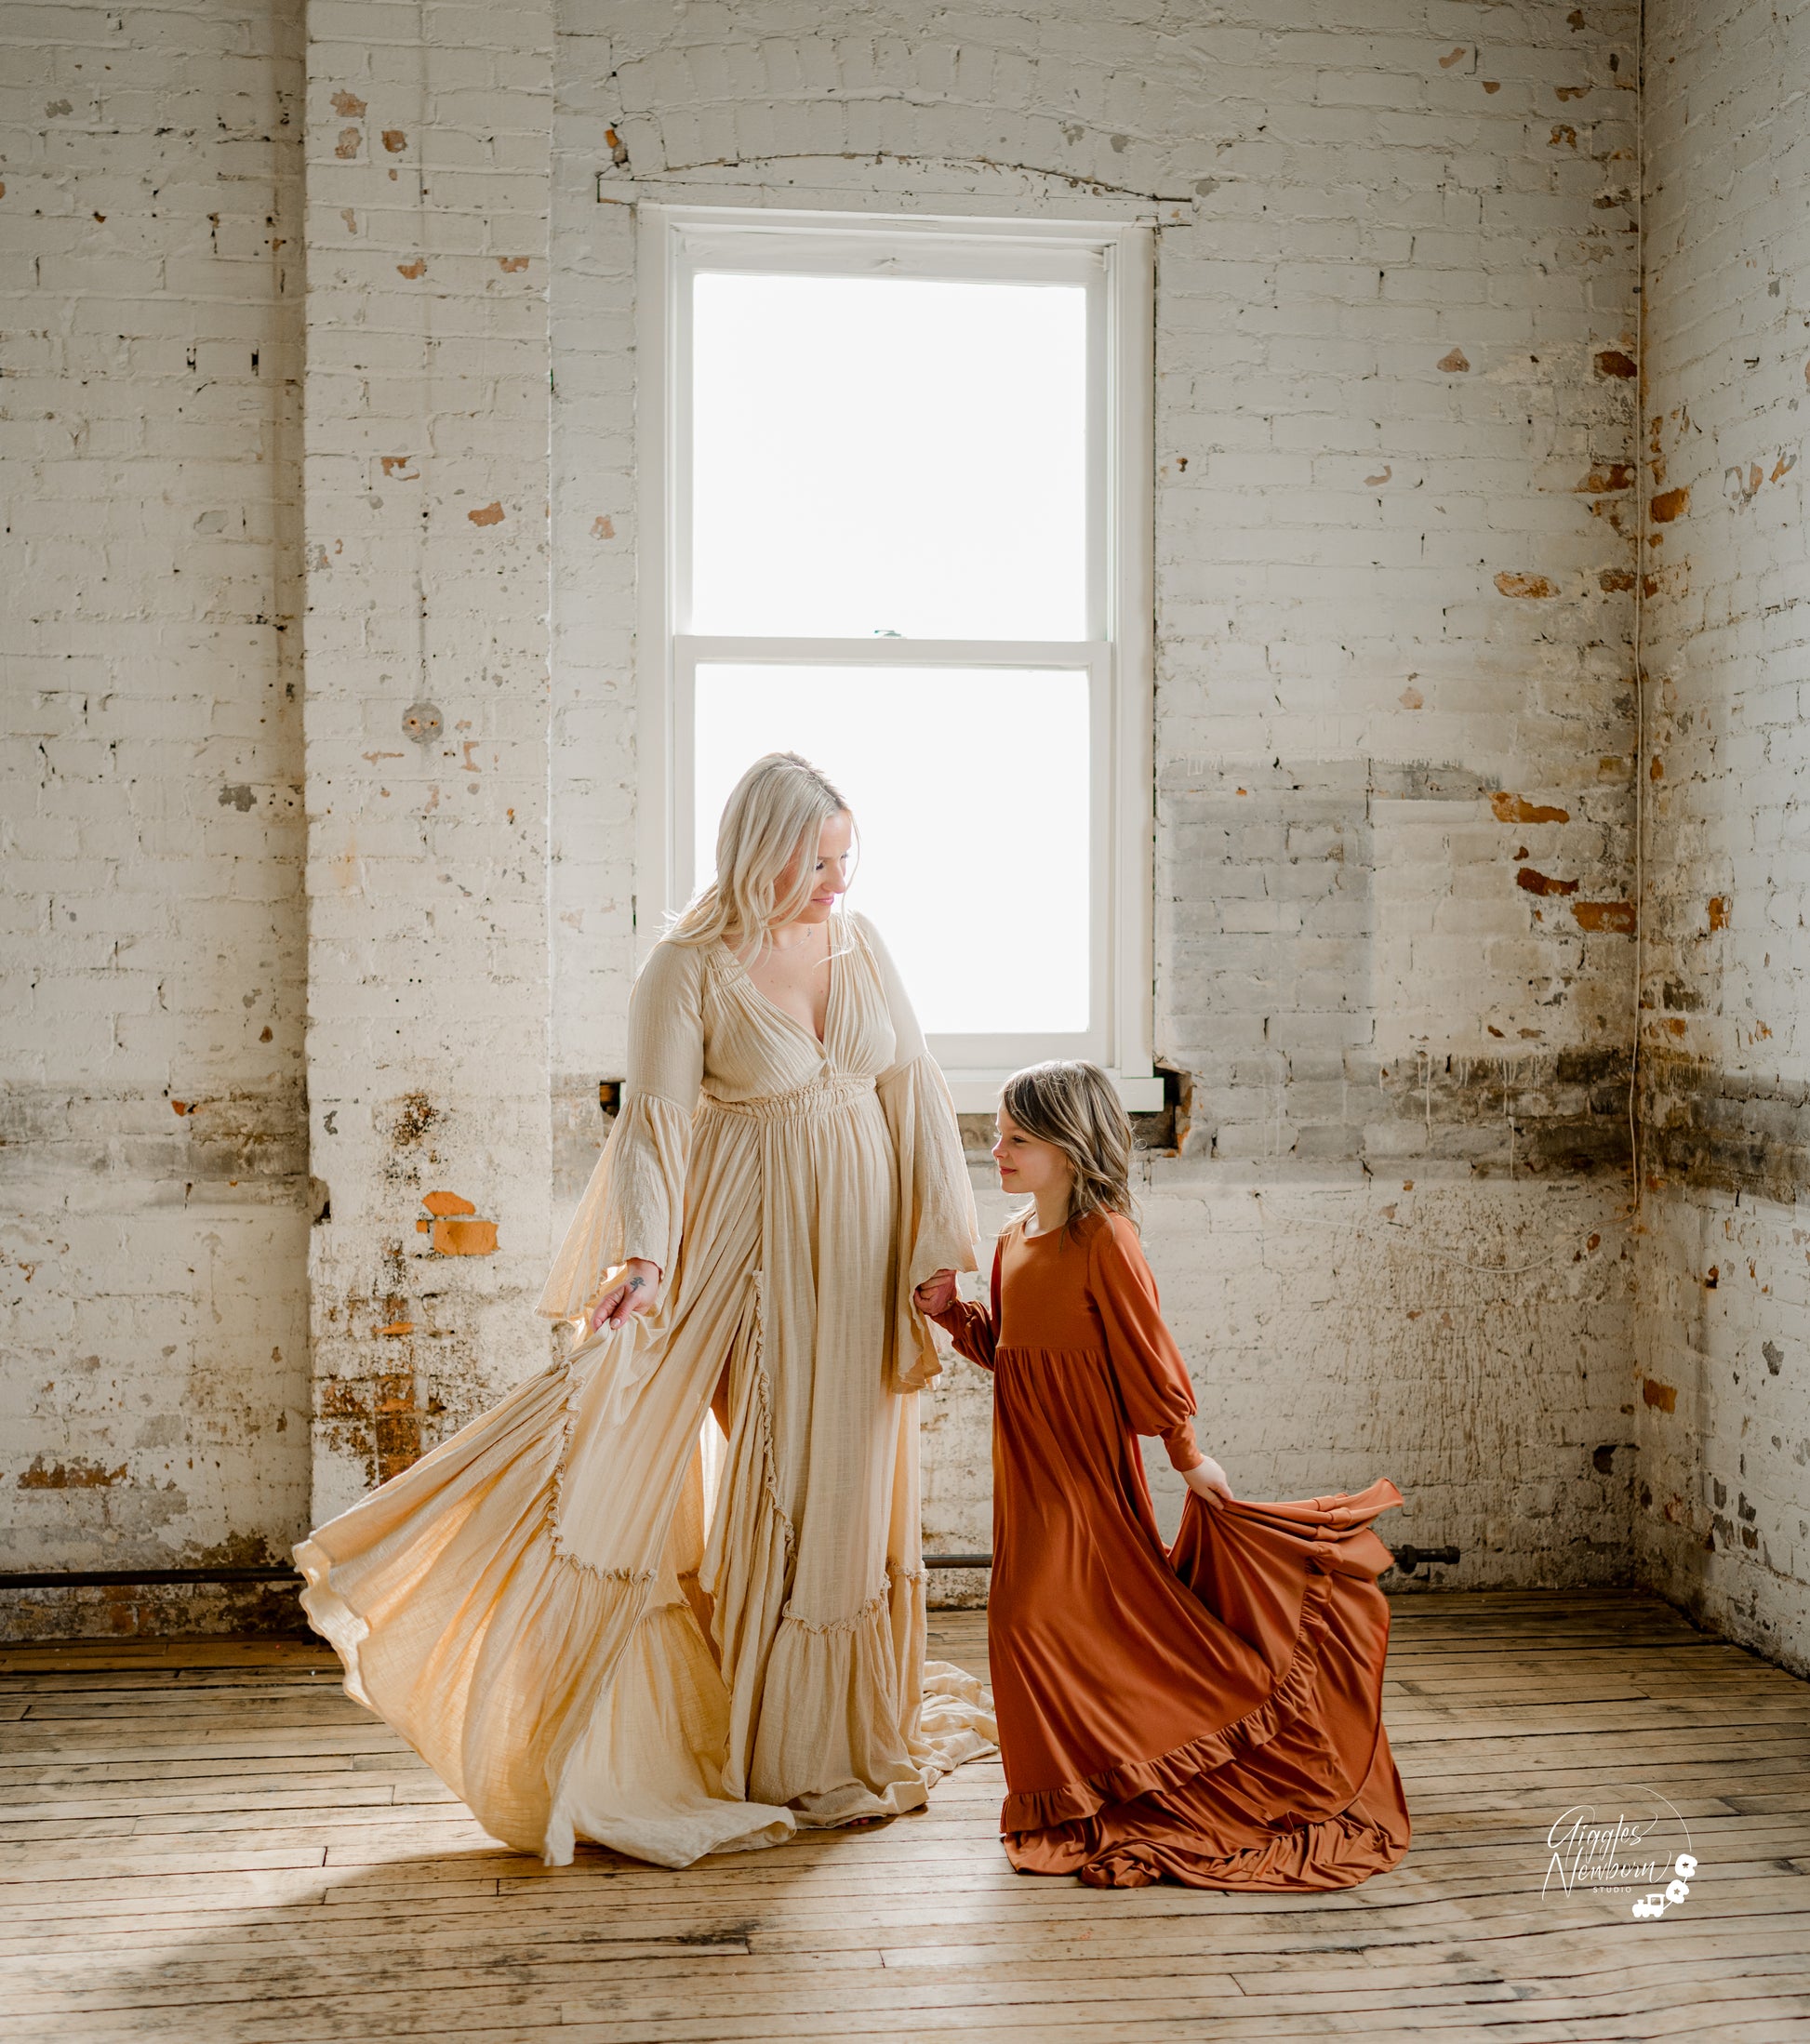 We Are Reclamation Dreams Like These Three Piece Gown - Mama Rentals